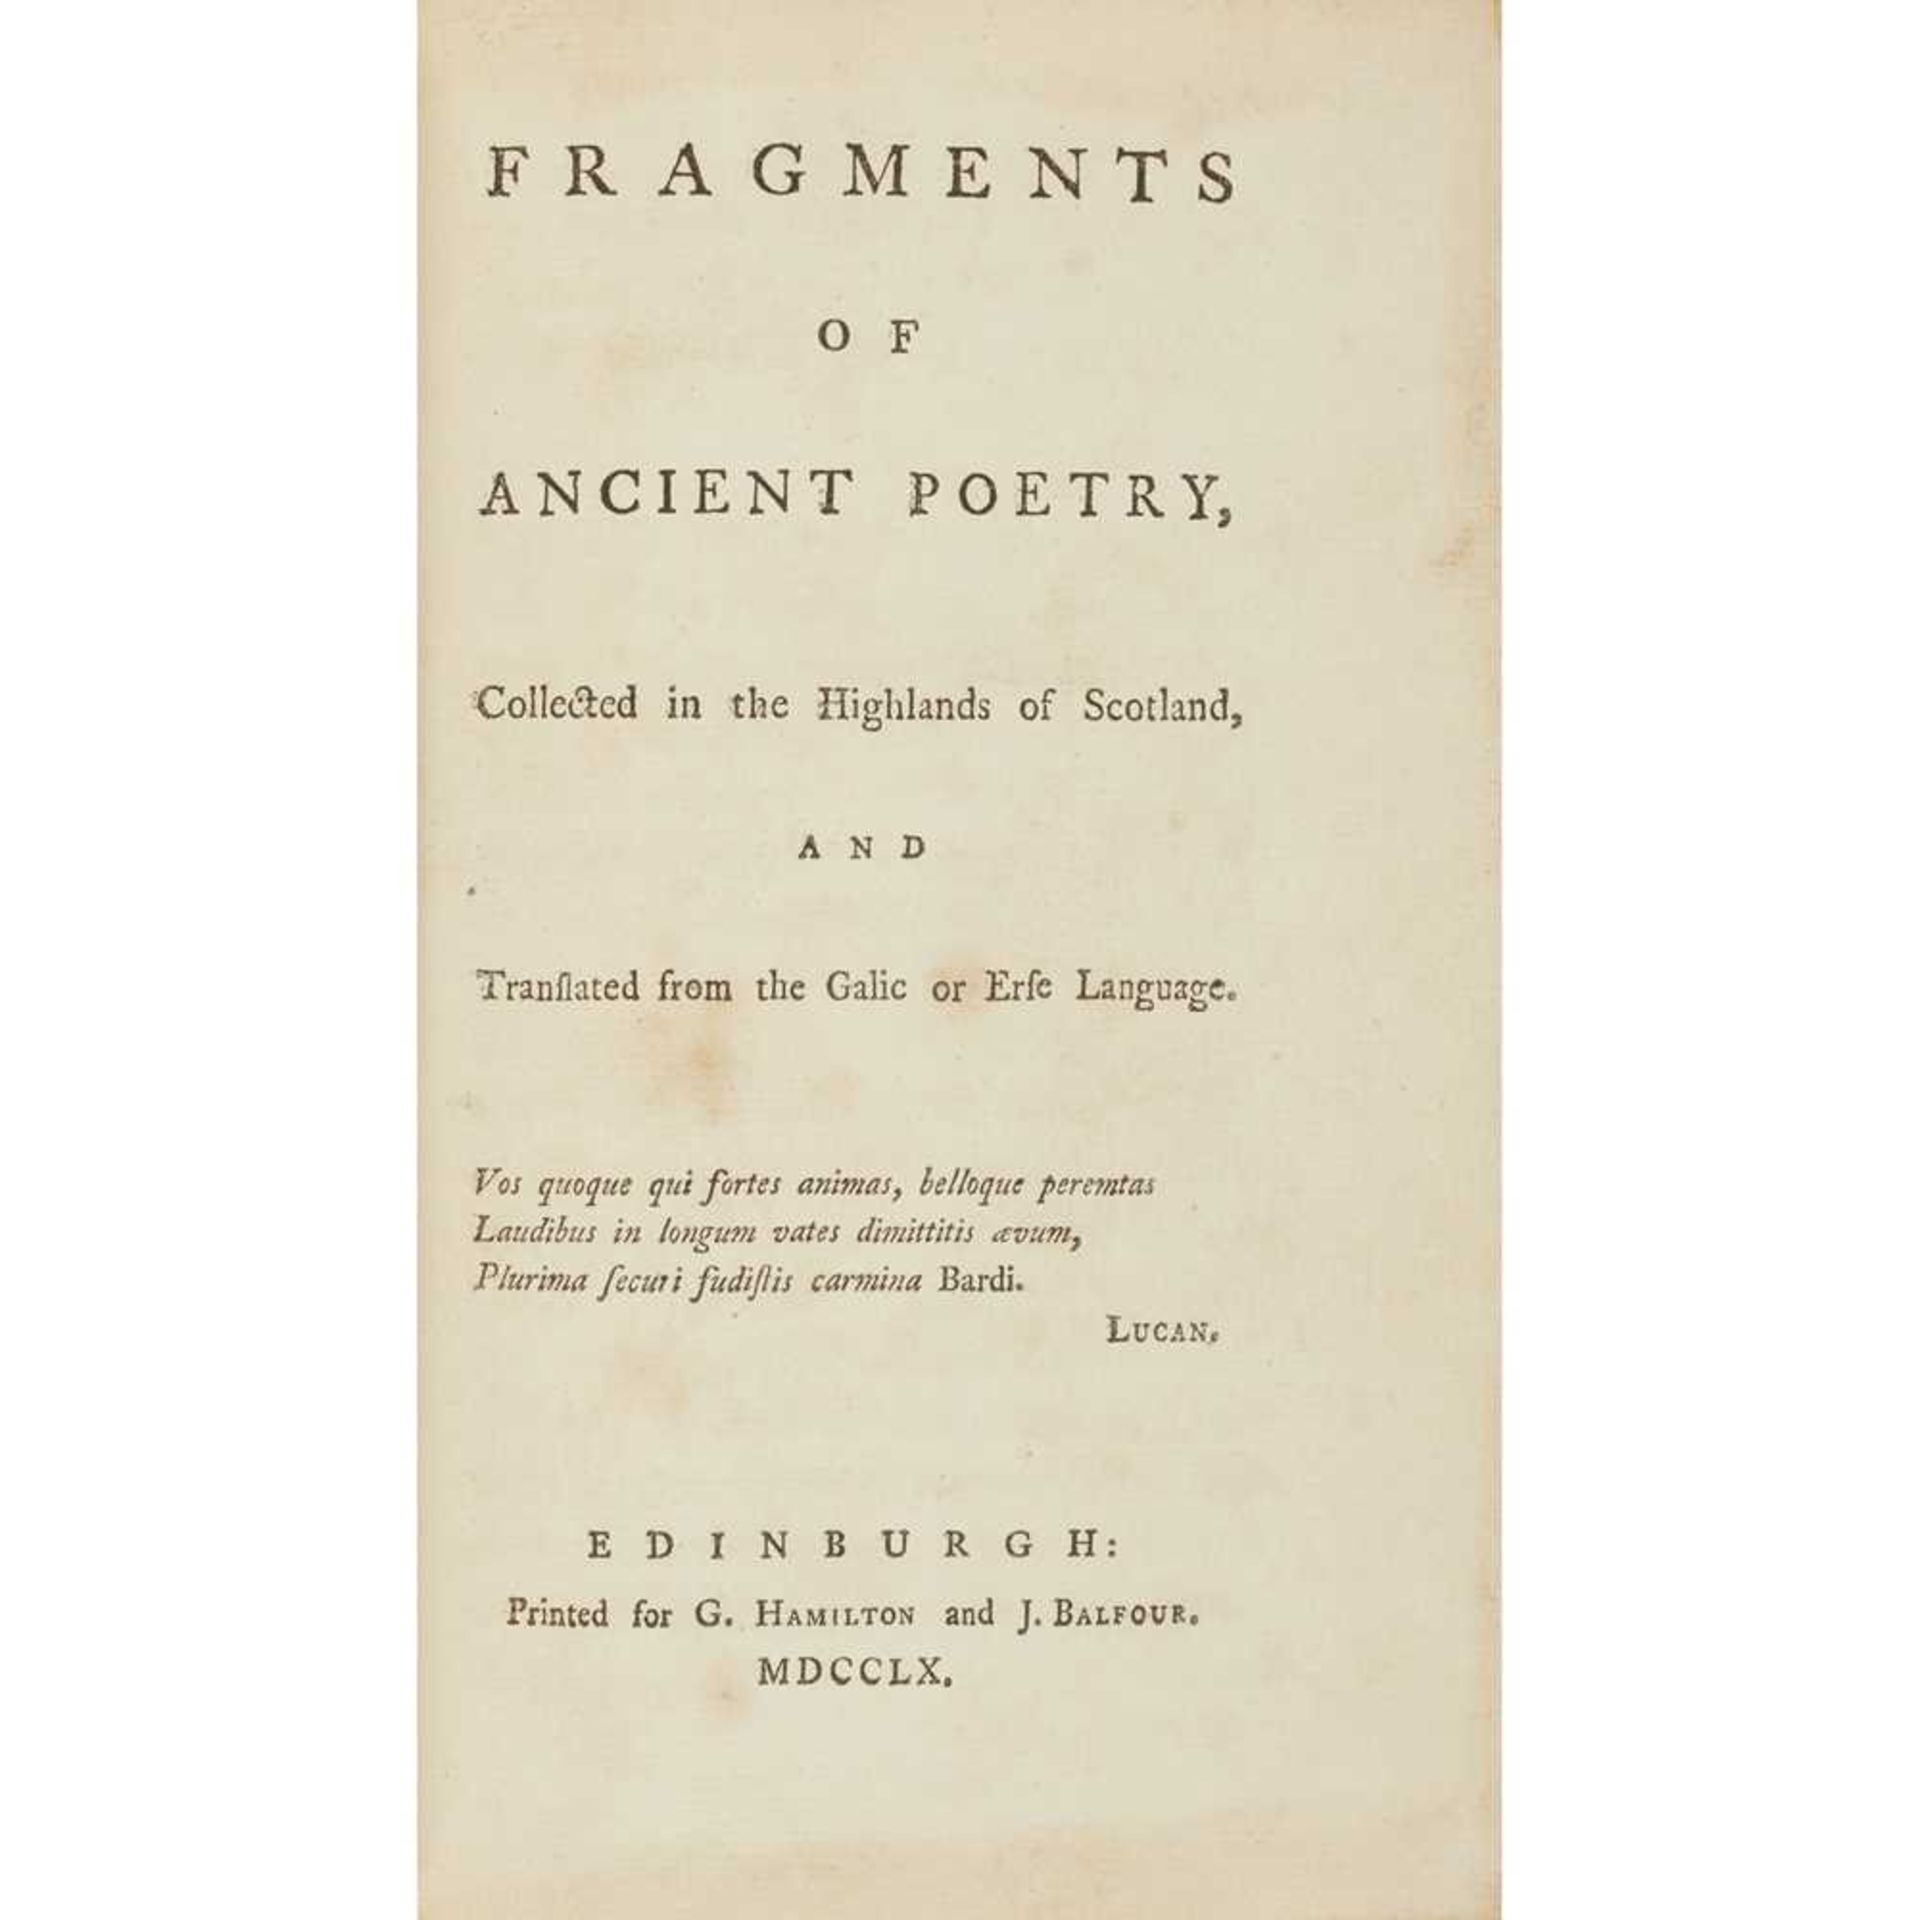 [Macpherson, James] Fragments of Ancient Poetry collected in the Highlands of Scotland, and